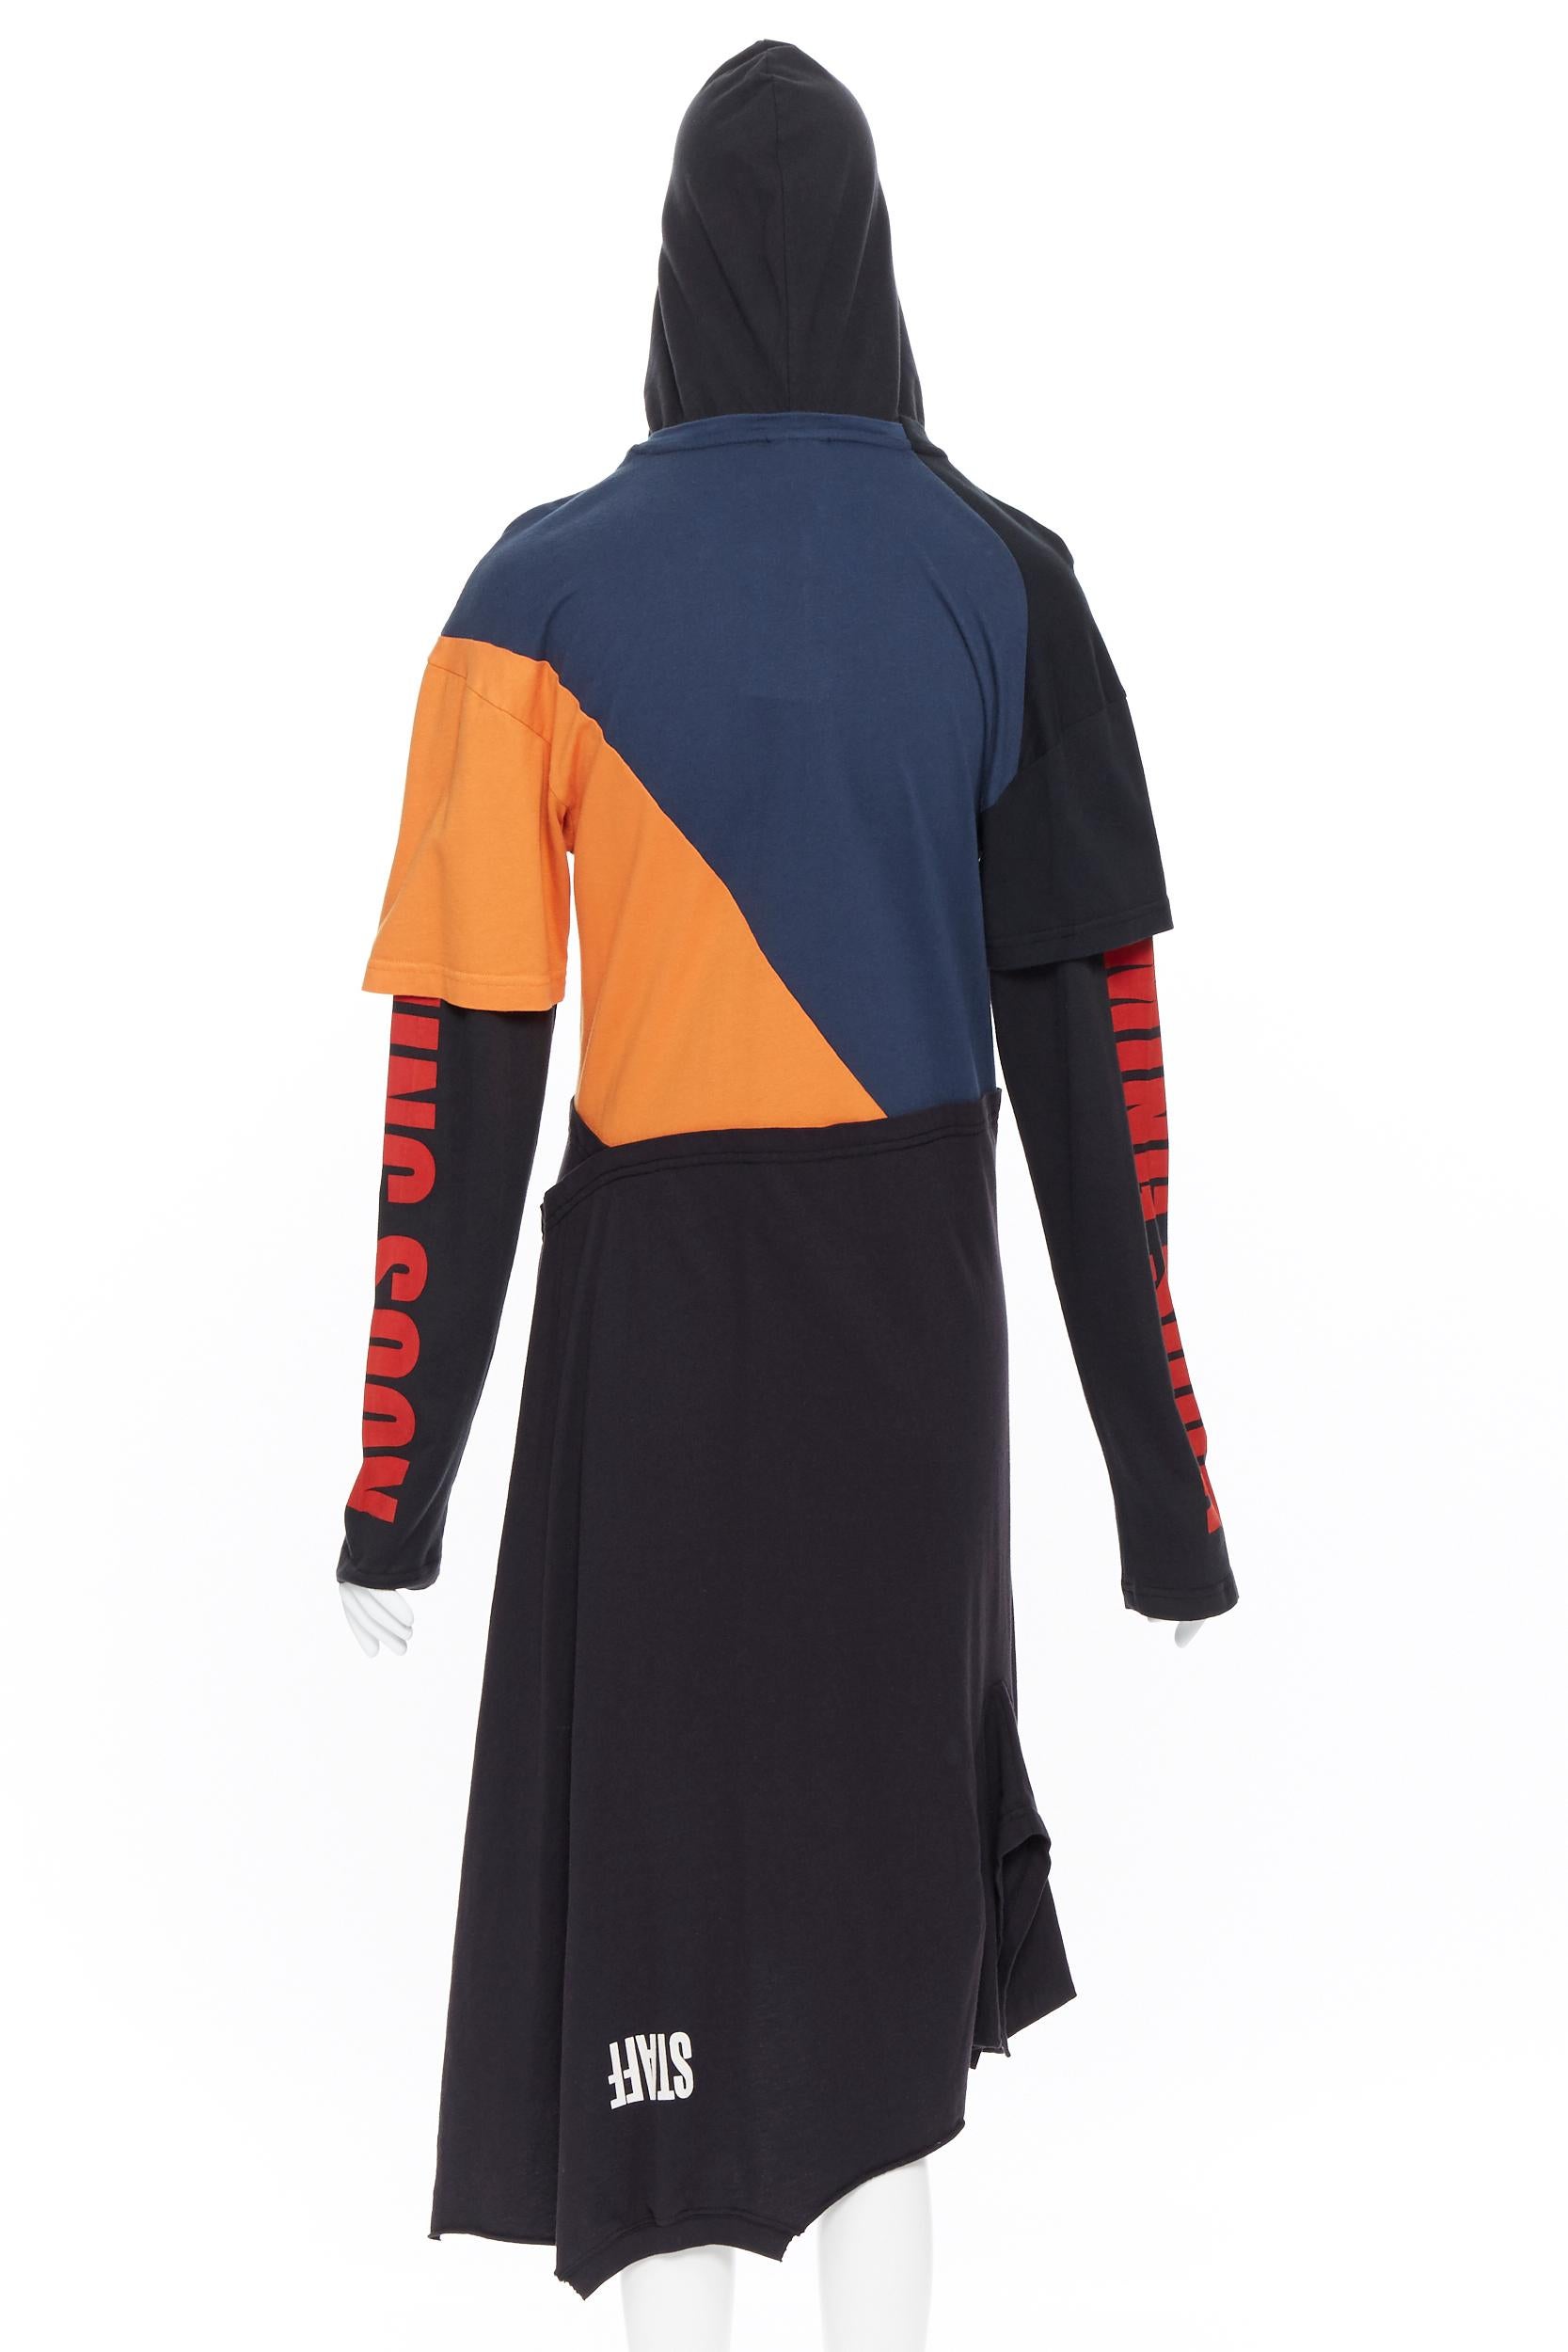 new VETEMENTS SS18 black deconstructed patchwork hooded t-shirt dress XS
Brand: Vetements
Designer: Demna Gvasalia
Model Name / Style: T-shirt dress
Material: Cotton
Color: Multicolour
Pattern: Solid
Extra Detail: Long sleeve.
Made in: